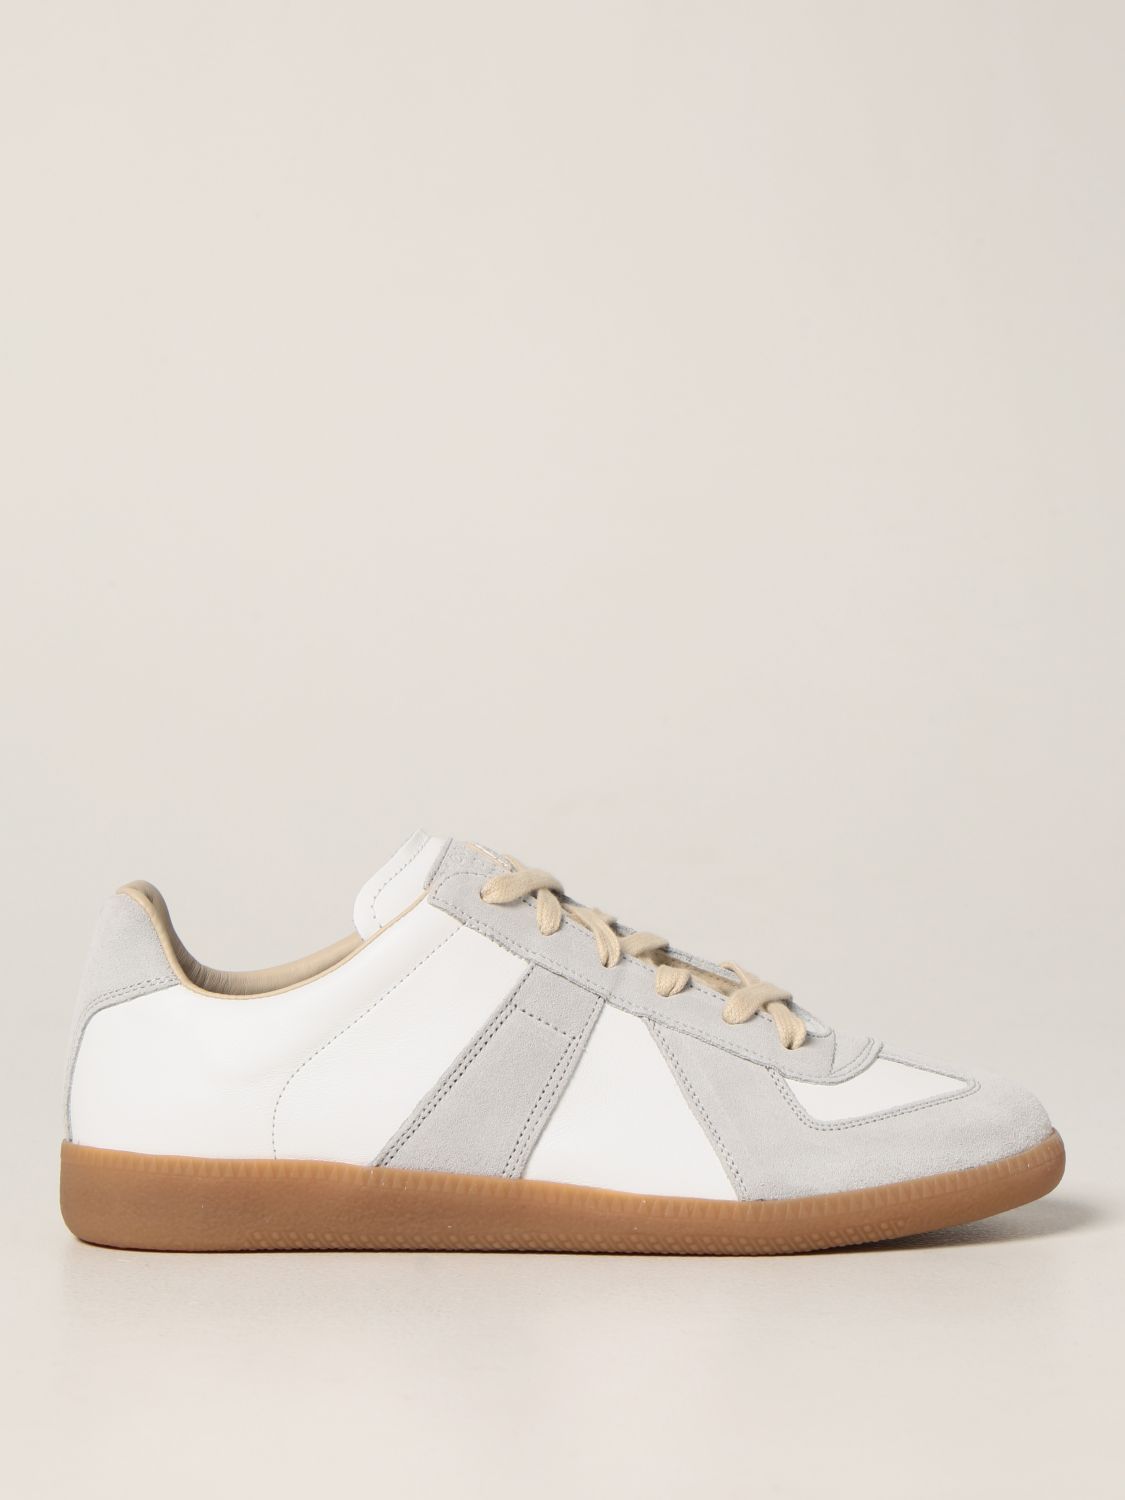 rent faktisk Mig selv pant MAISON MARGIELA: Replica suede and leather sneakers - White | Maison Margiela  sneakers S57WS0236P1895 online at GIGLIO.COM